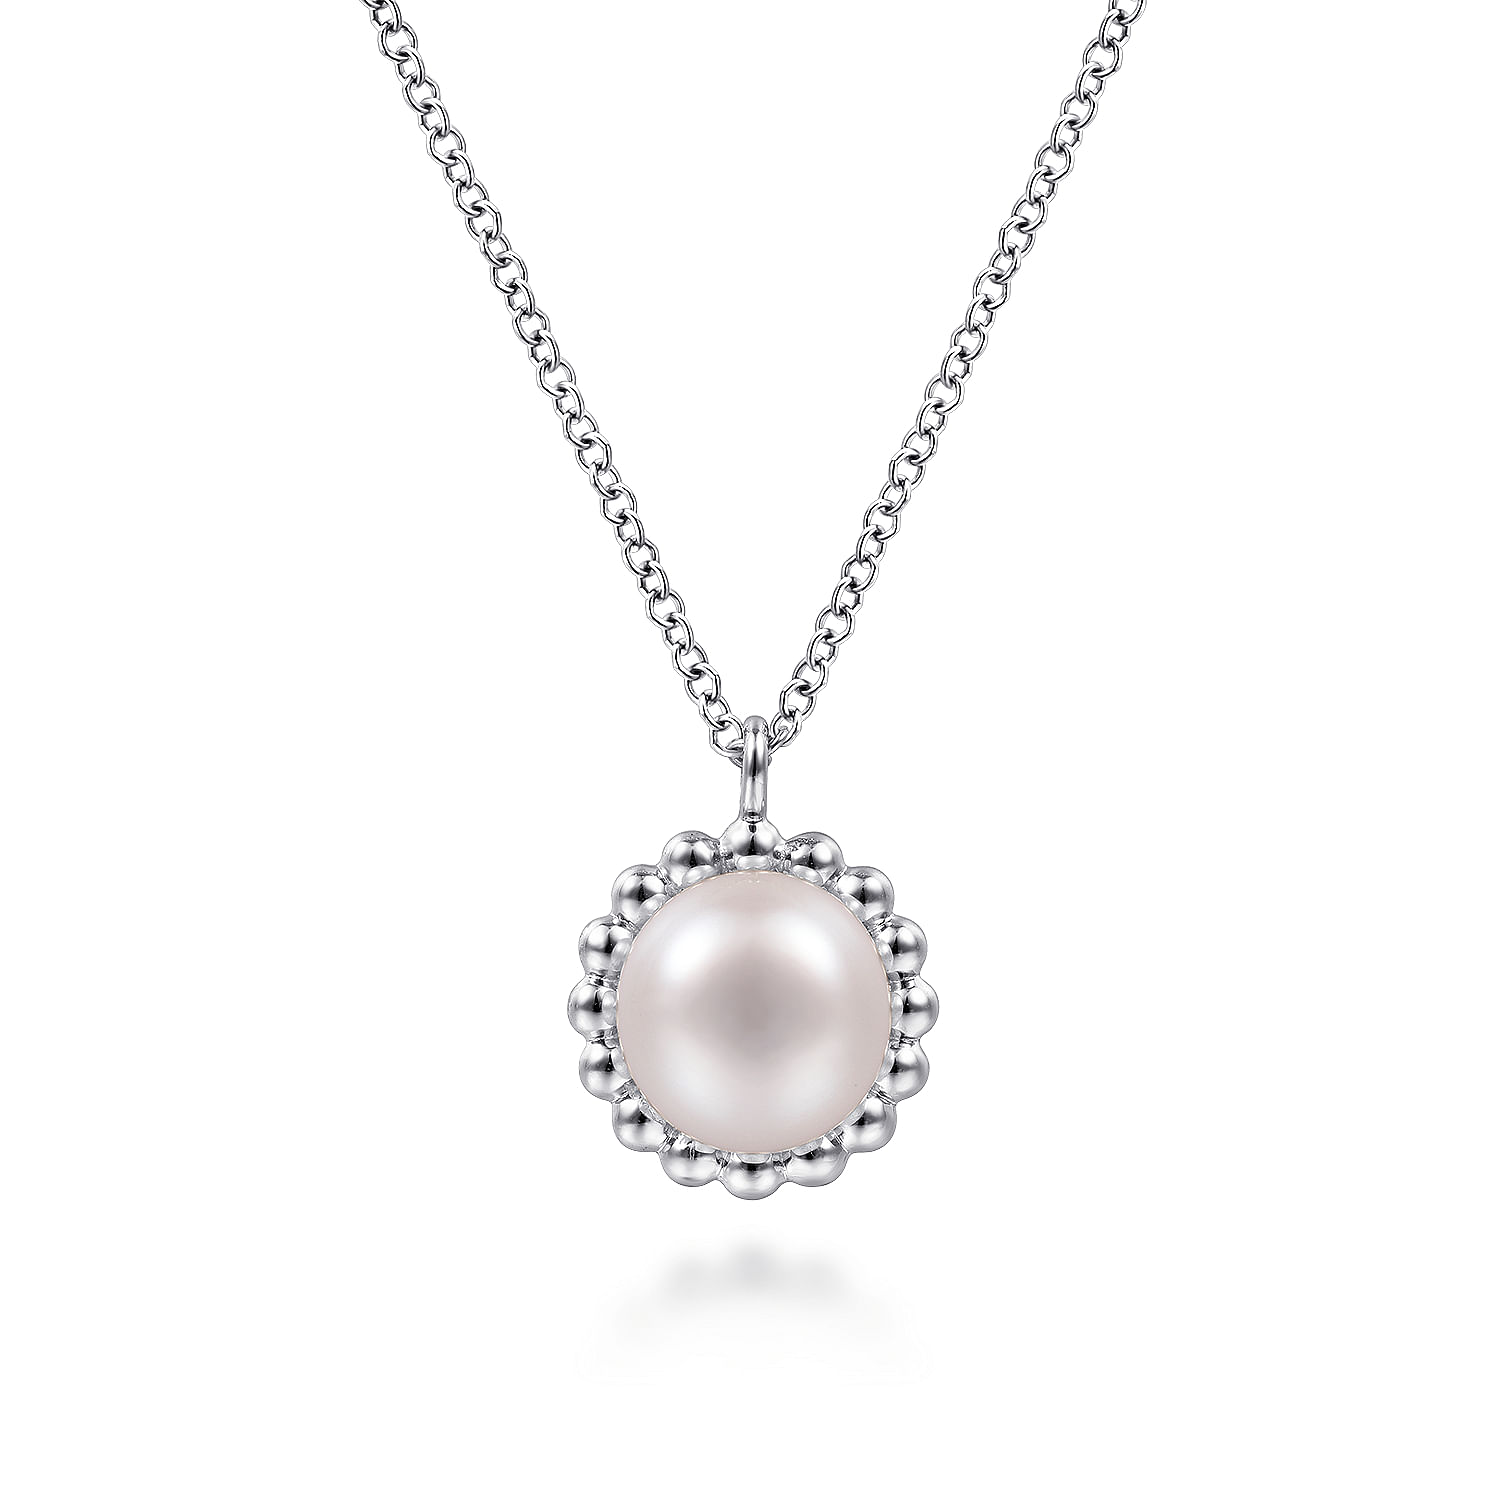 Sterling Silver Round Pearl Pendant Necklace with Beaded Frame